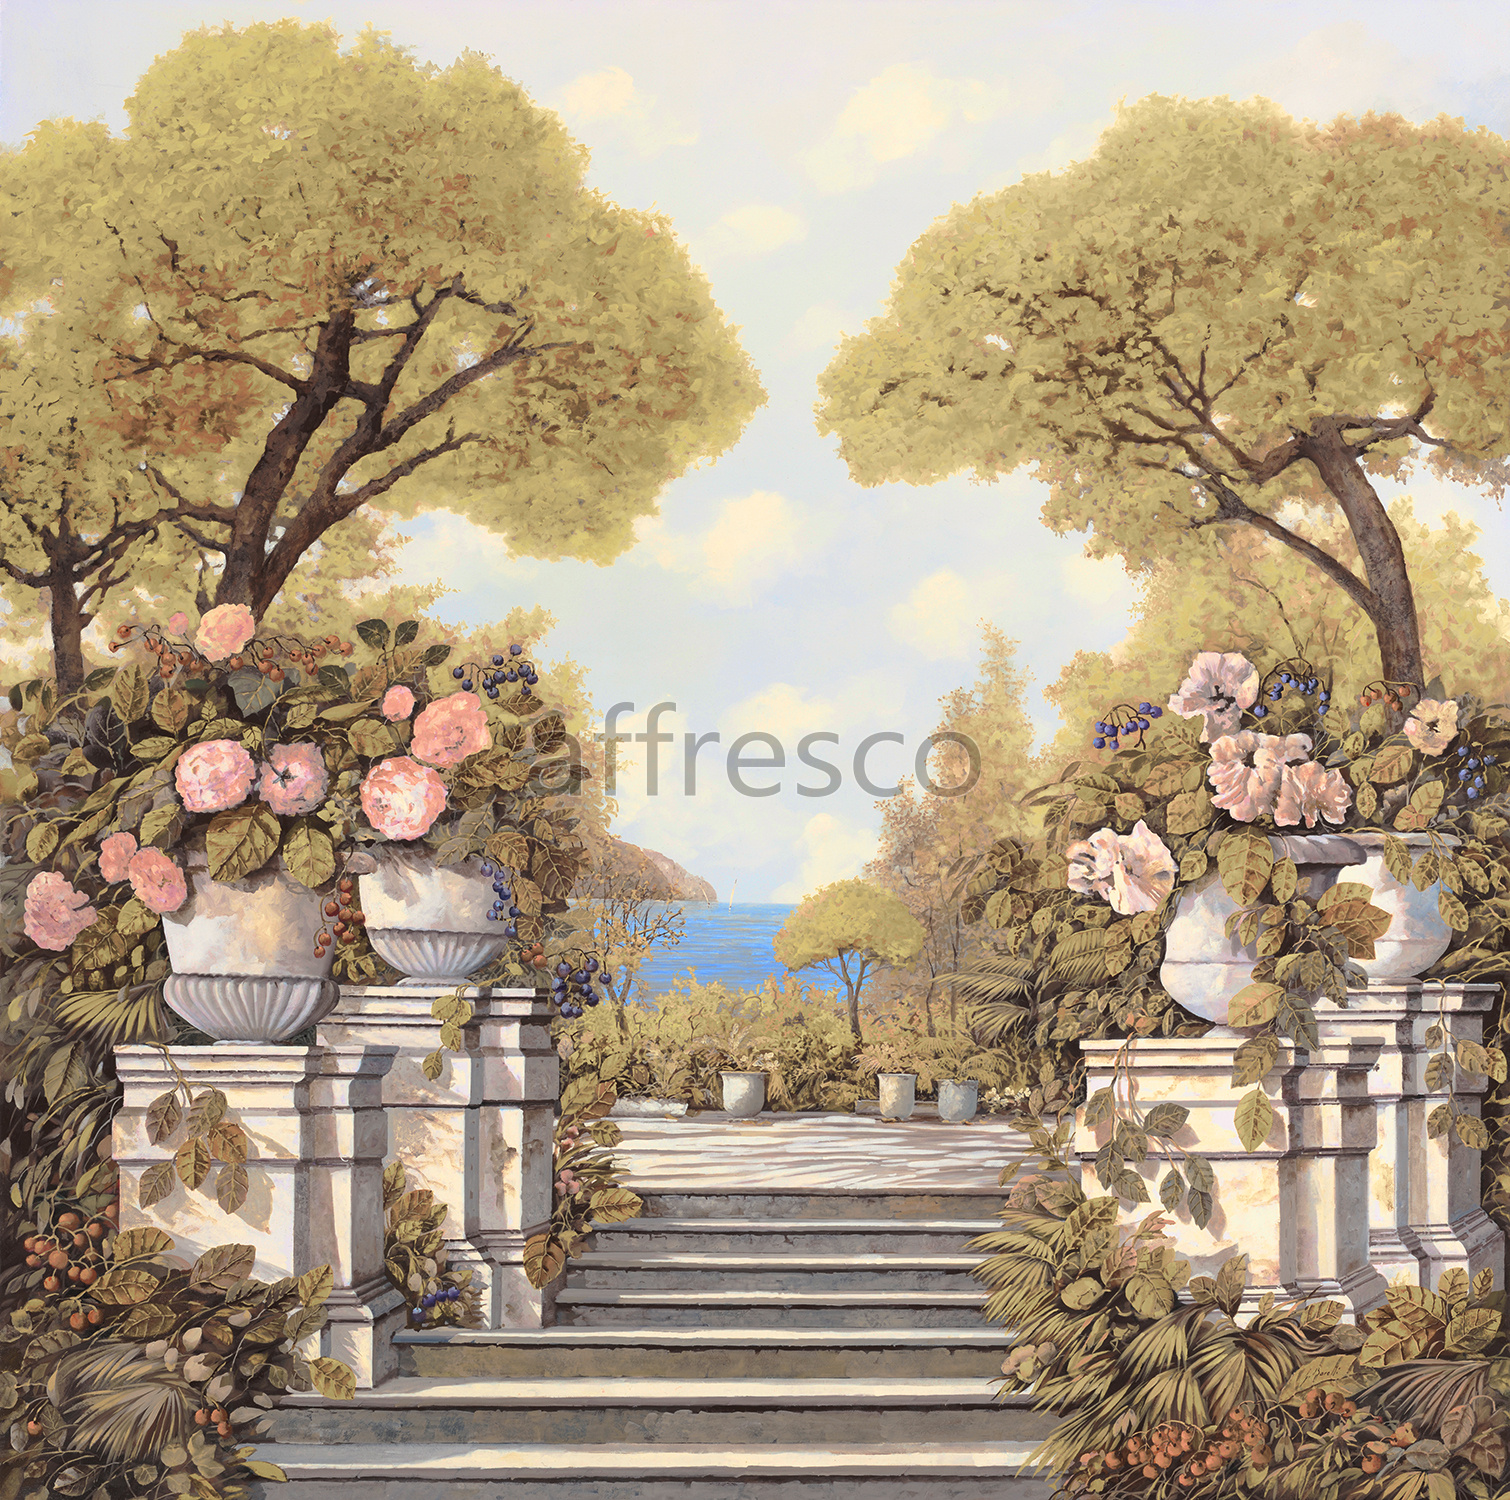 6731 | Picturesque scenery | Stairs to a garden | Affresco Factory